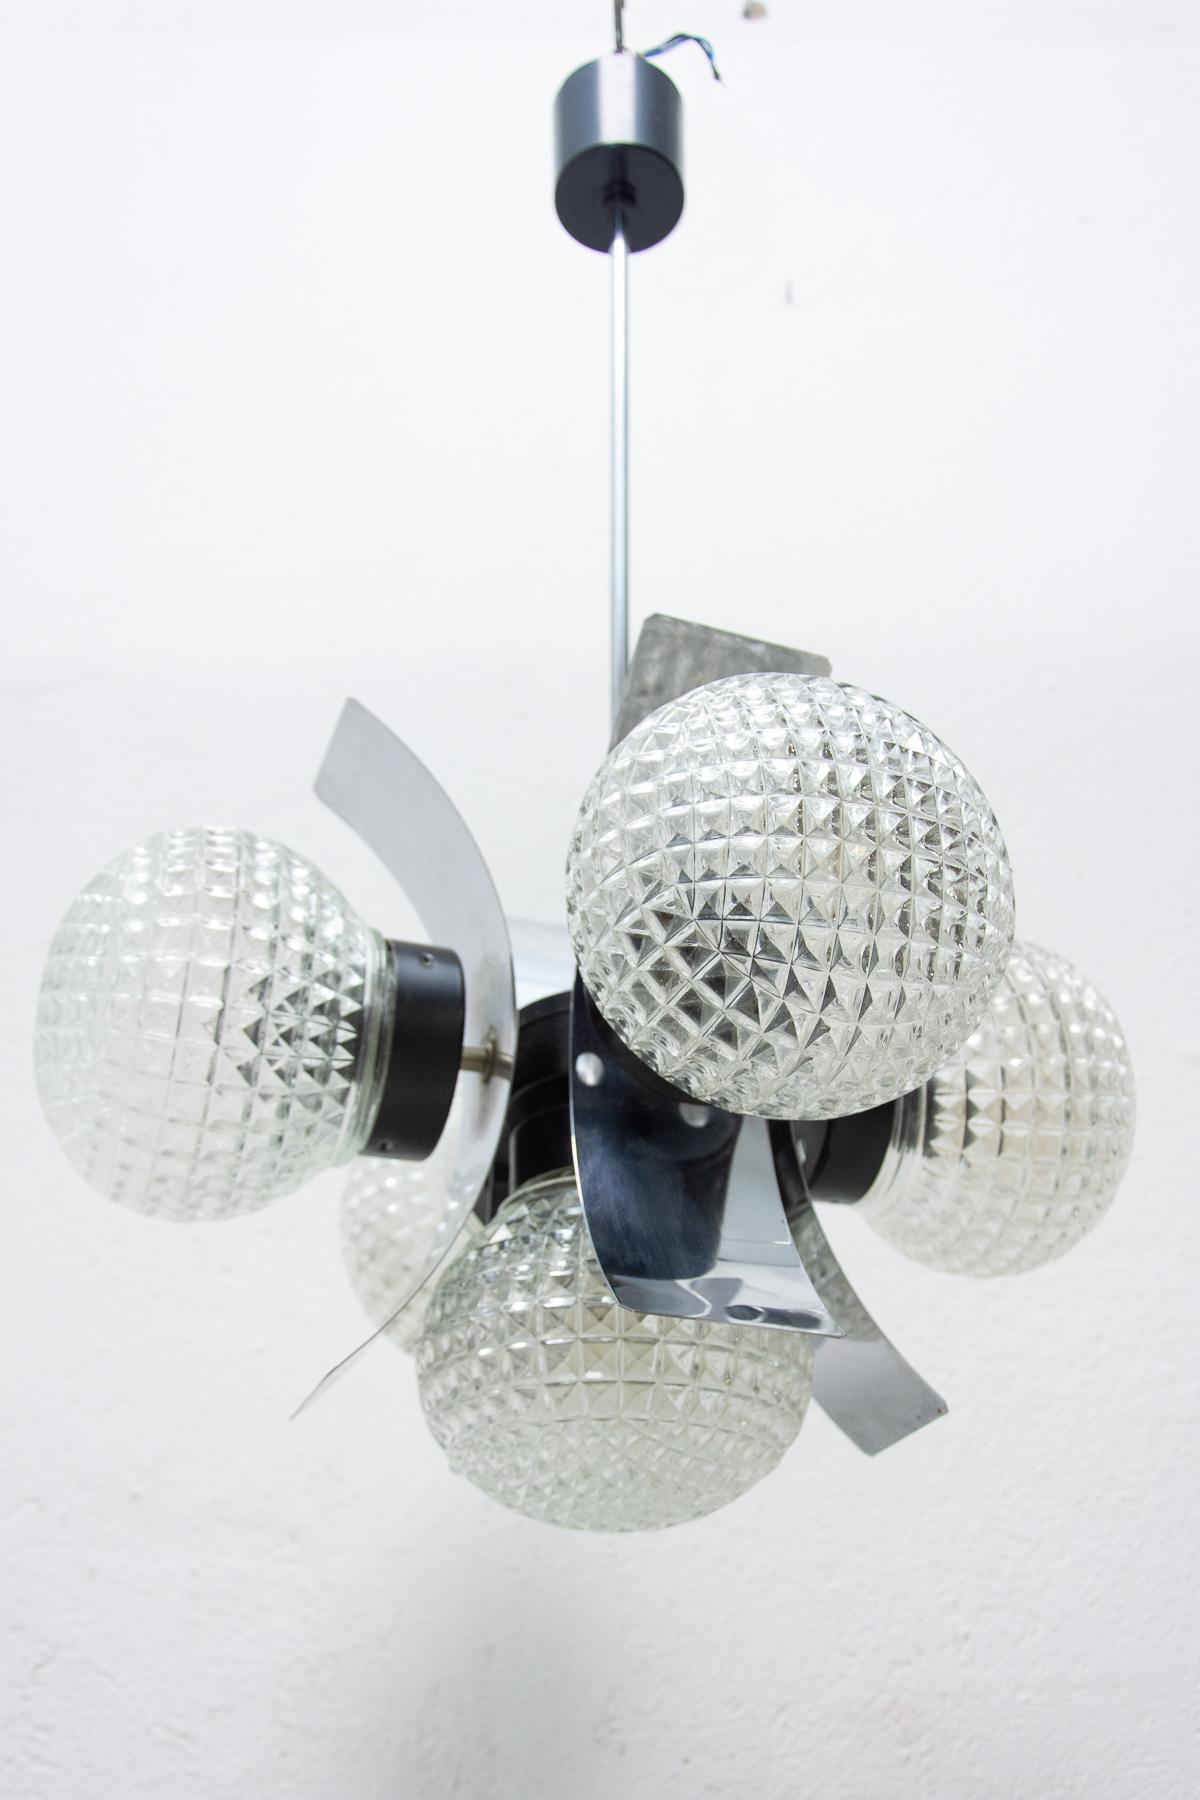 20th Century Eastern Bloc Brutalist Pendant Lamp from the 1970s, Czechoslovakia For Sale